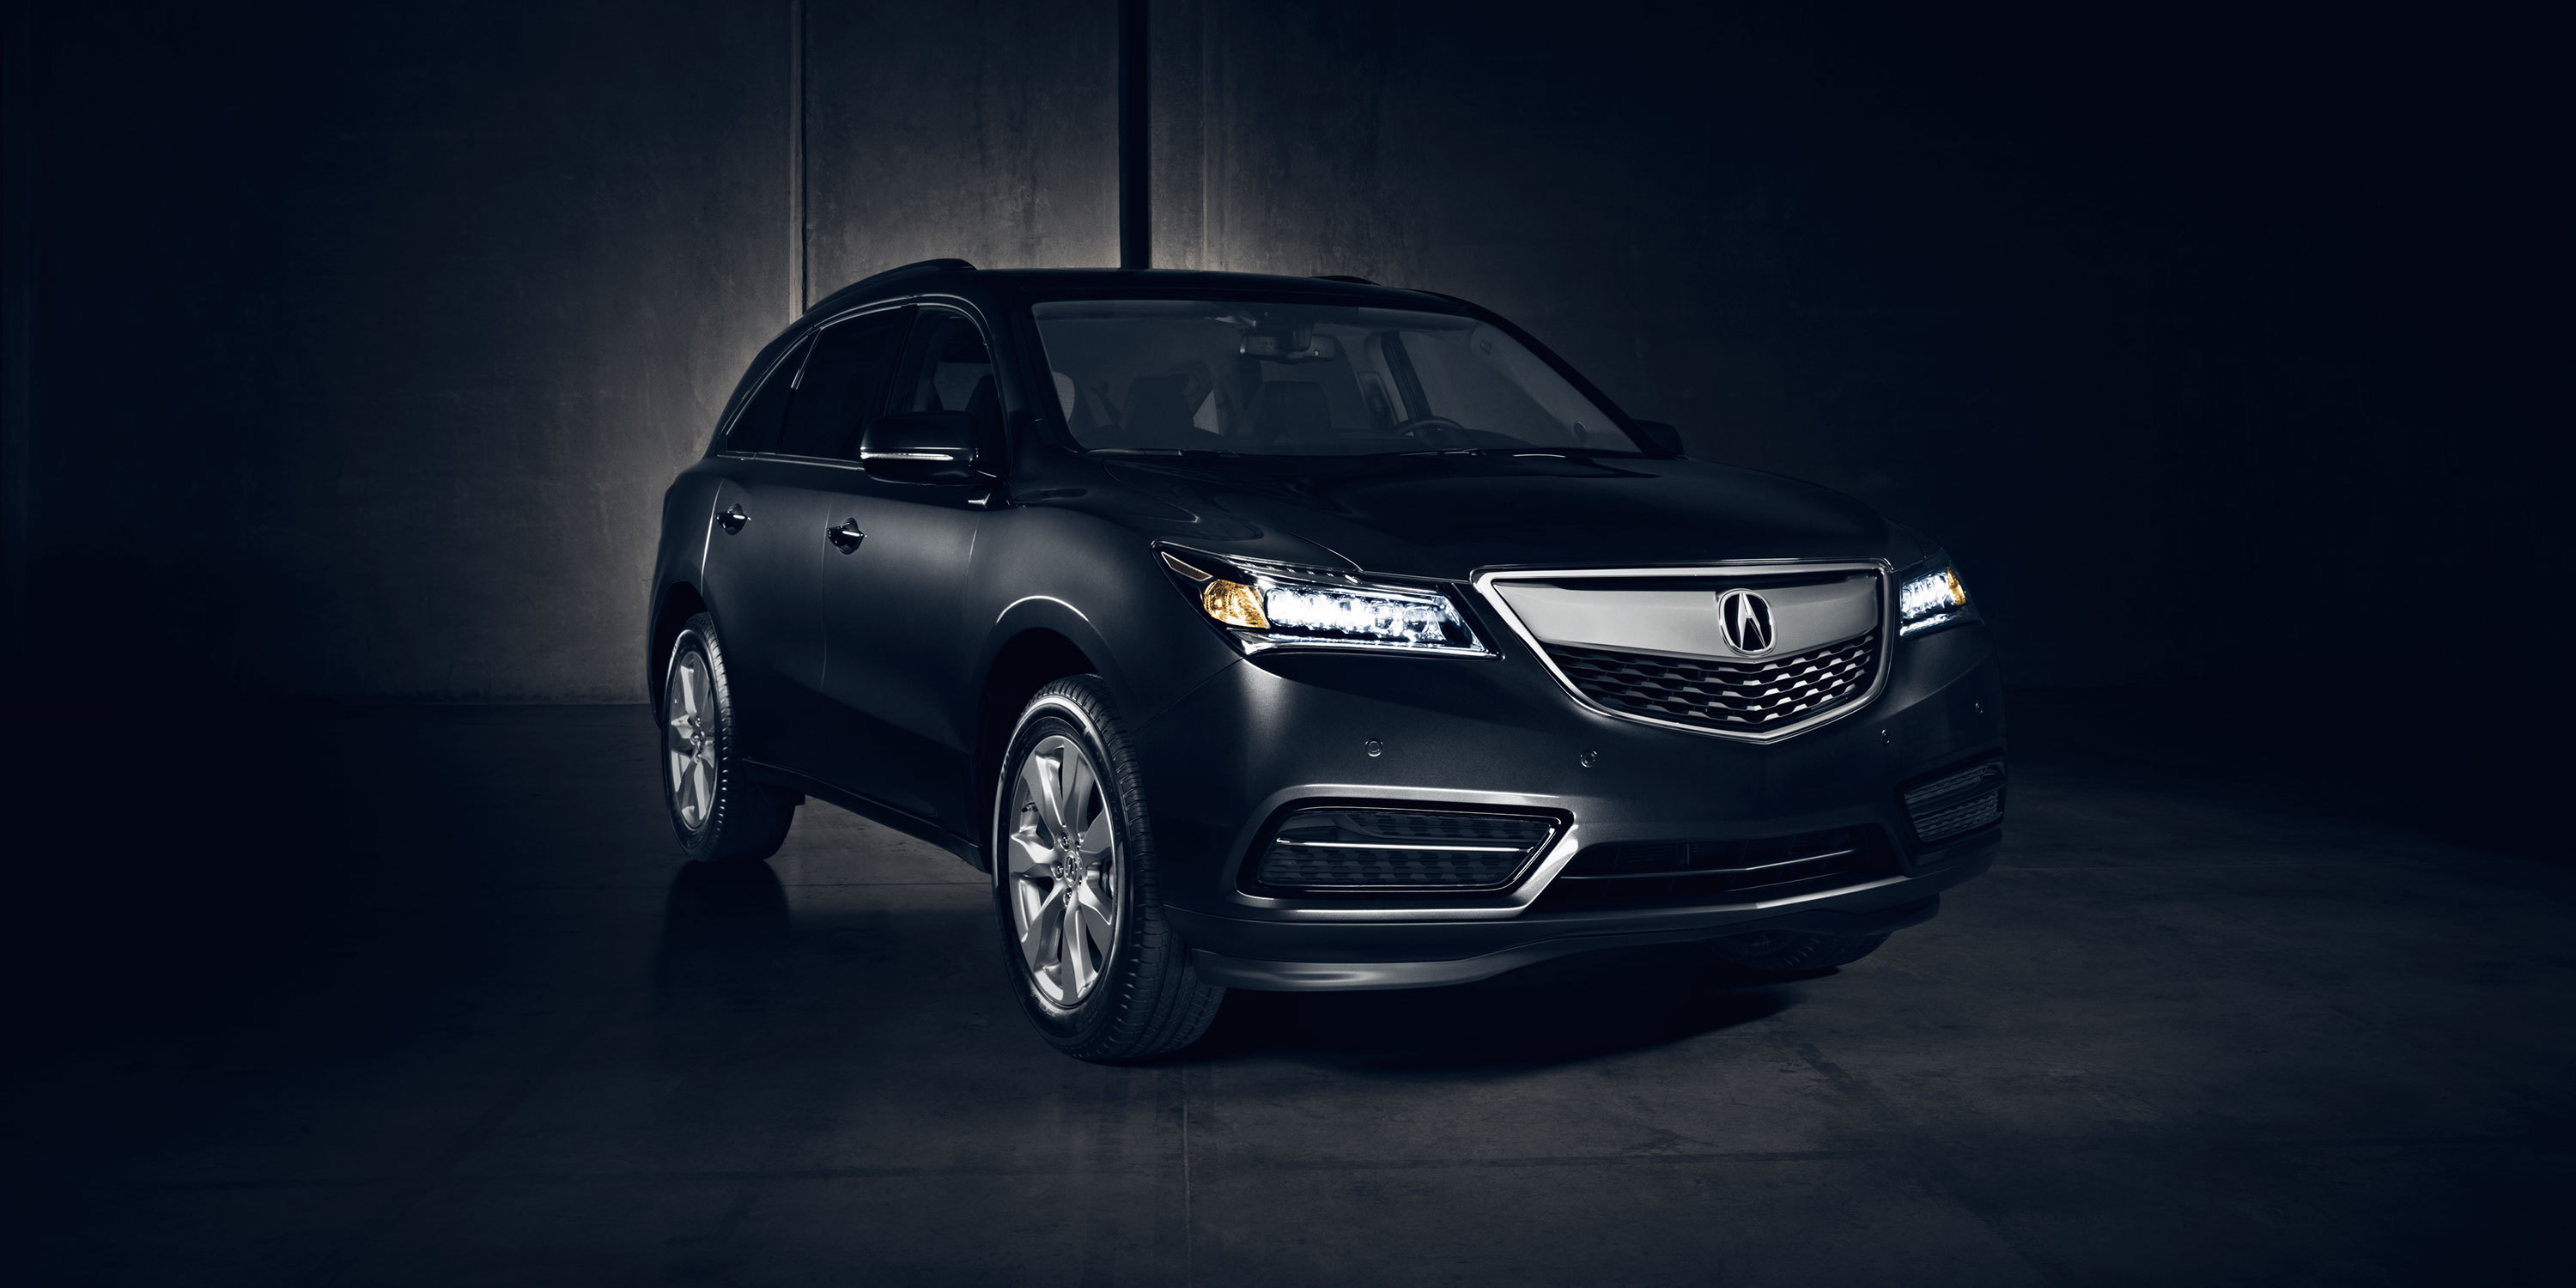 2014 Acura Mdx Hd Wallpaper Background Image 3000x1500